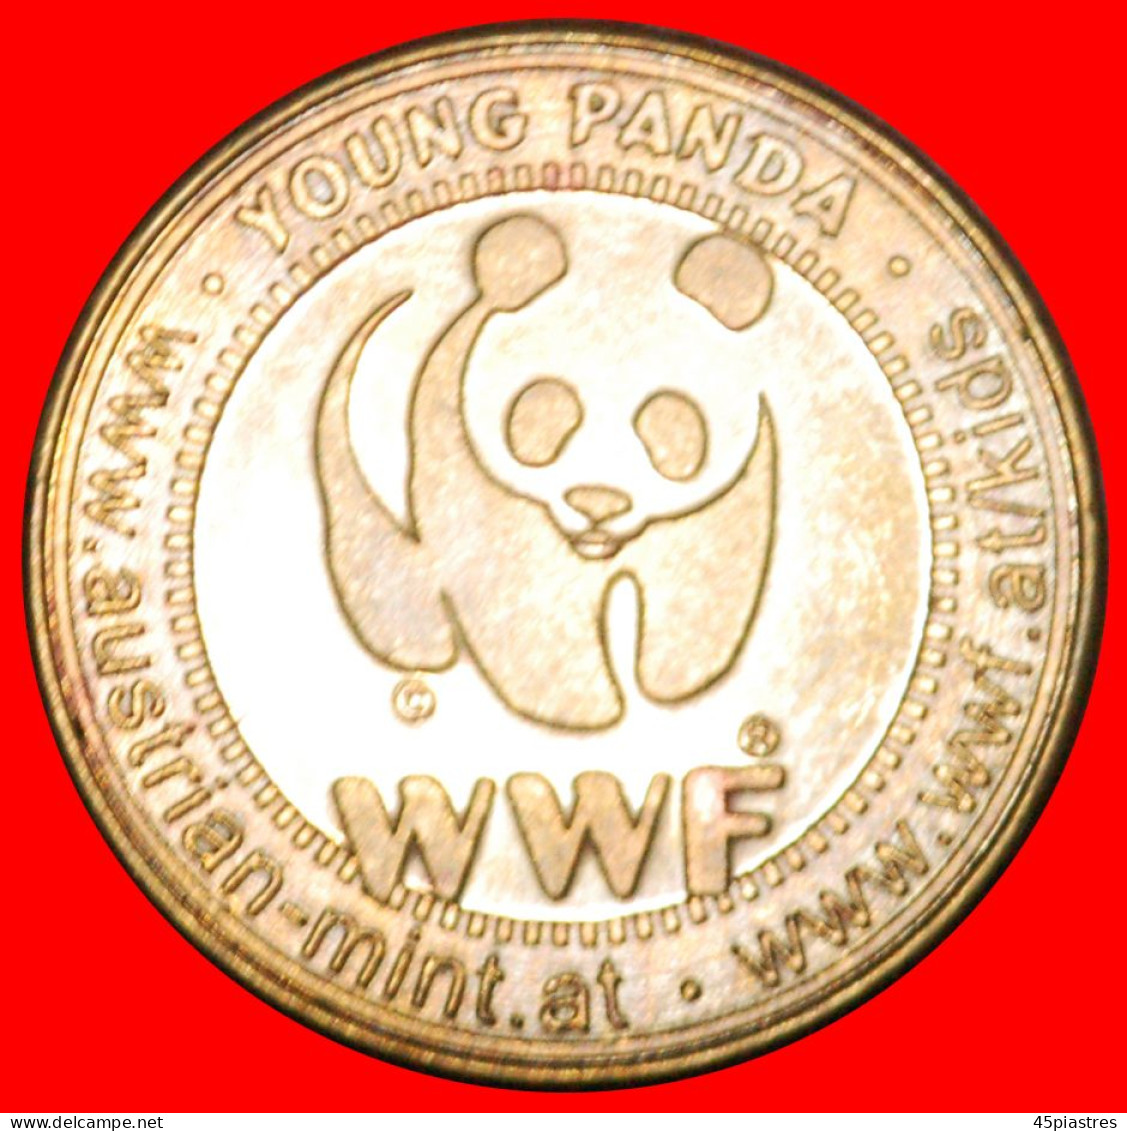 * BEAVER: AUSTRIA  WWF For Kids UNC MINT LUSTRE TO BE PUBLISHED! ·  LOW START · NO RESERVE! - Professionals / Firms